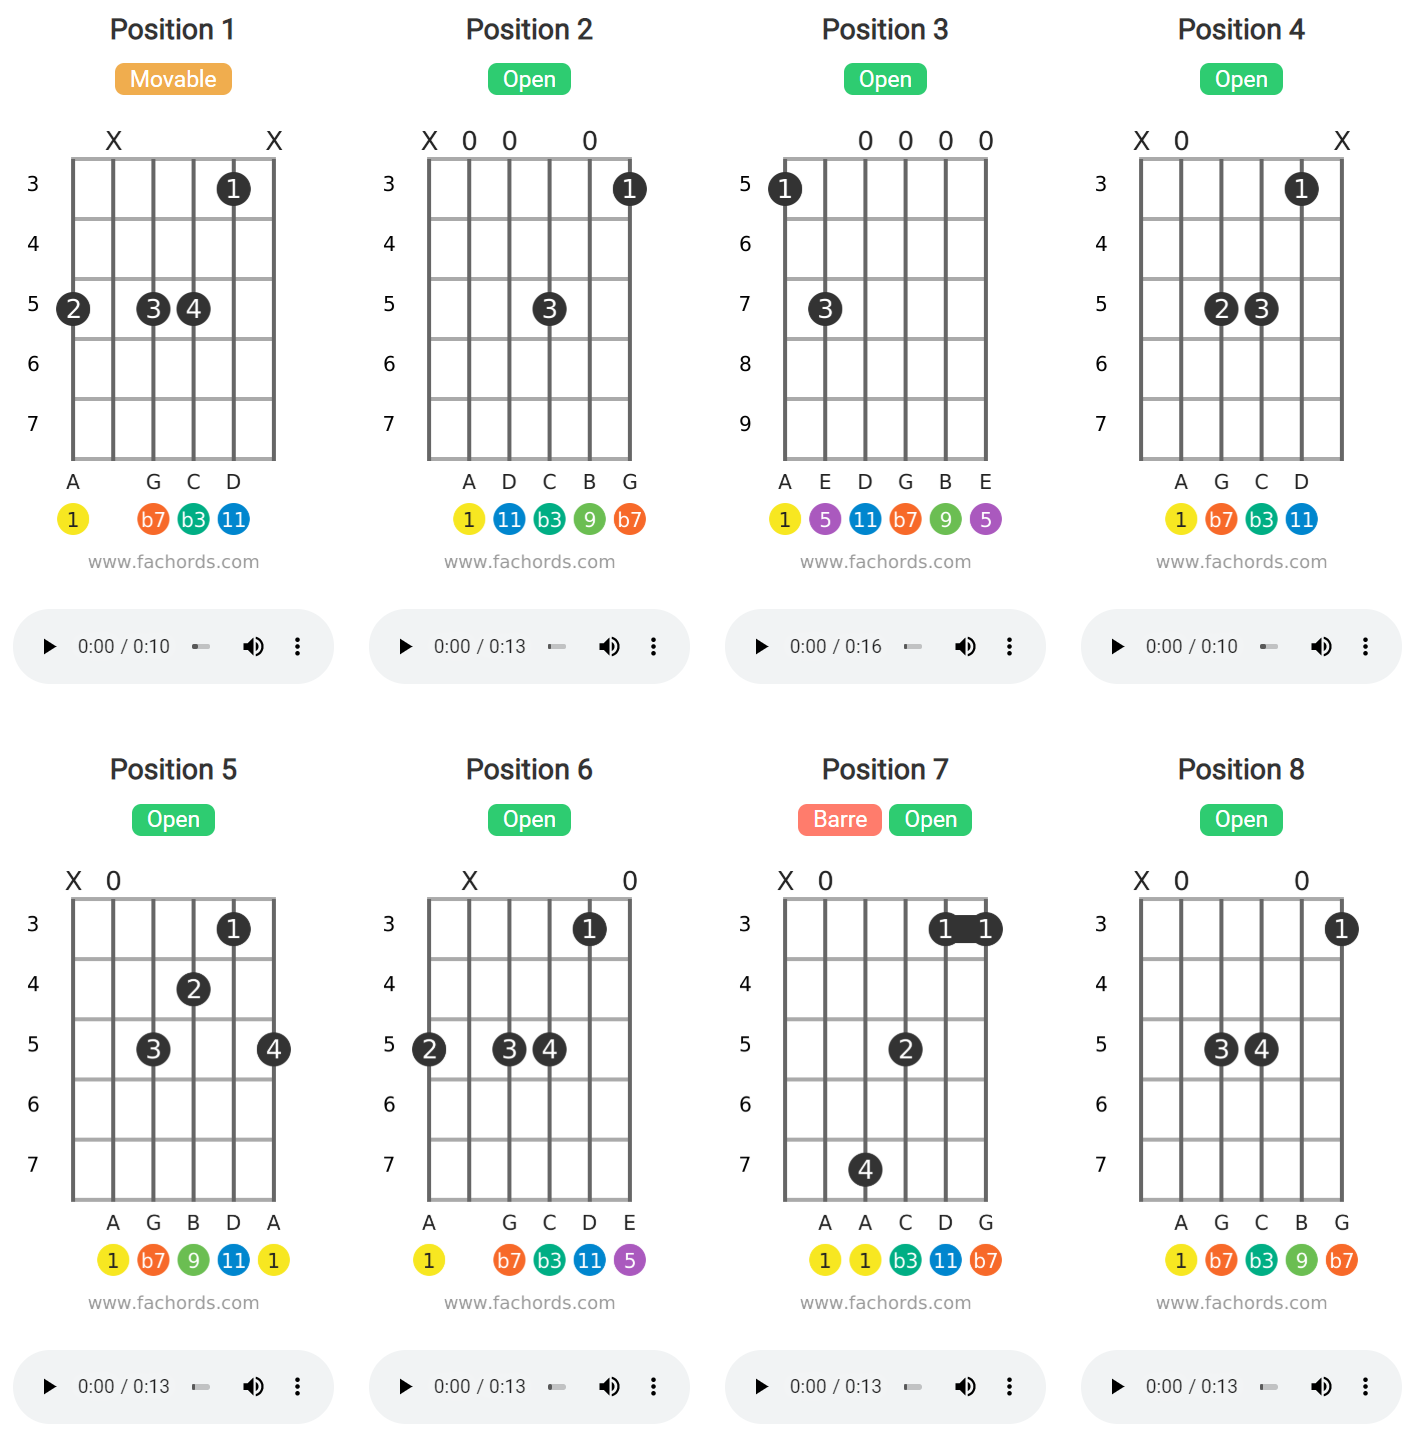 Xfachords Utlimate Chord Chart .pagespeed.ic.z Hnt9tzII 